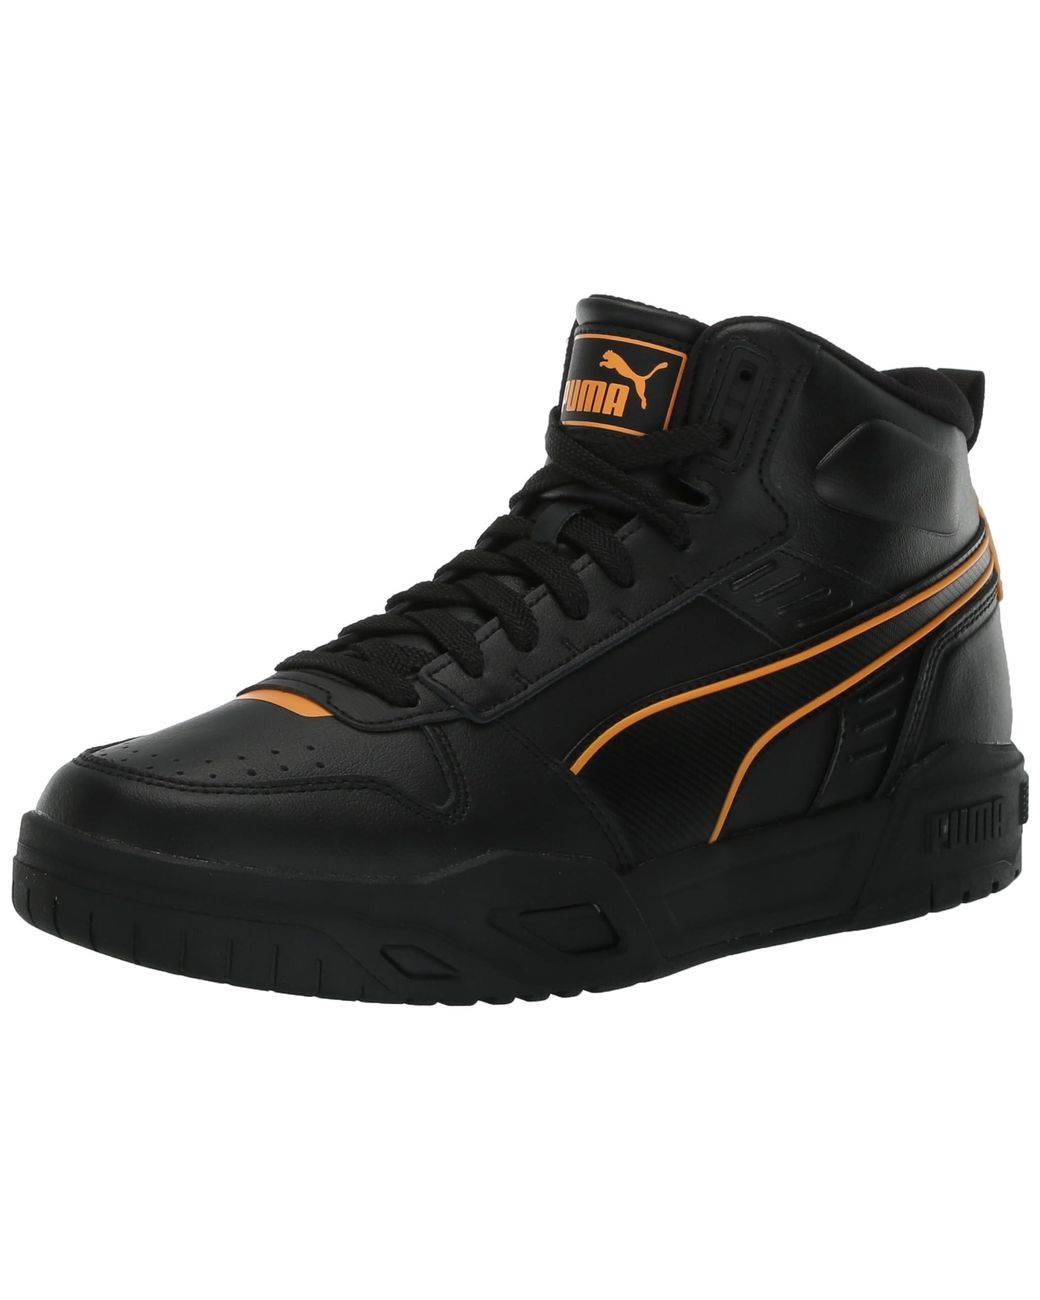 Buy Trinity Mid Hybrid Sneakers Men's Footwear from Puma. Find Puma fashion  & more at